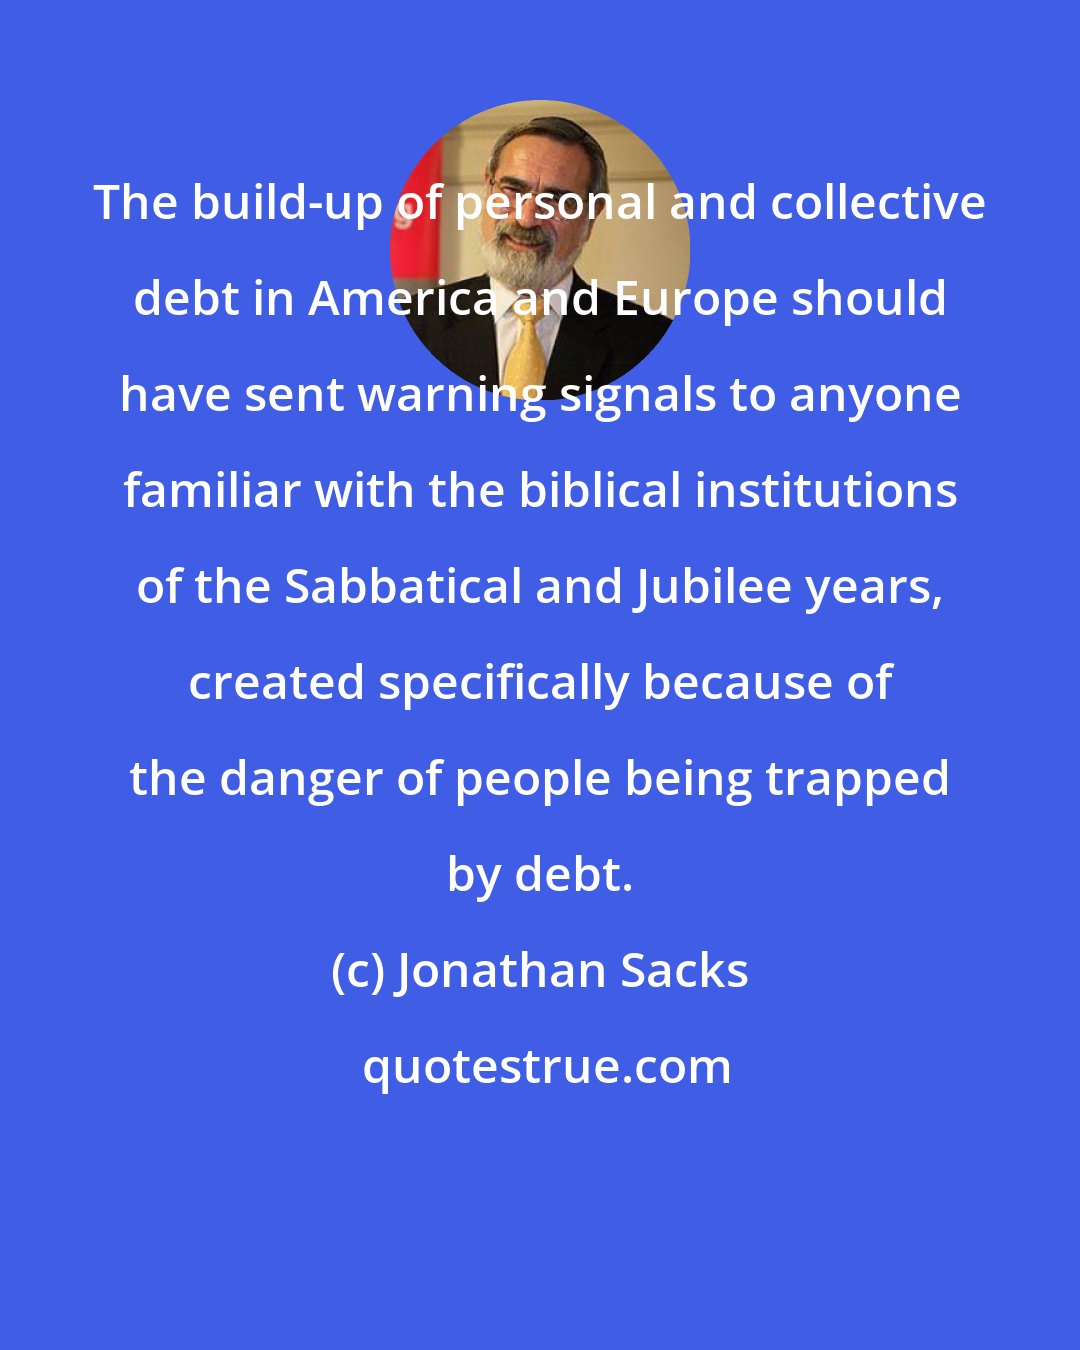 Jonathan Sacks: The build-up of personal and collective debt in America and Europe should have sent warning signals to anyone familiar with the biblical institutions of the Sabbatical and Jubilee years, created specifically because of the danger of people being trapped by debt.